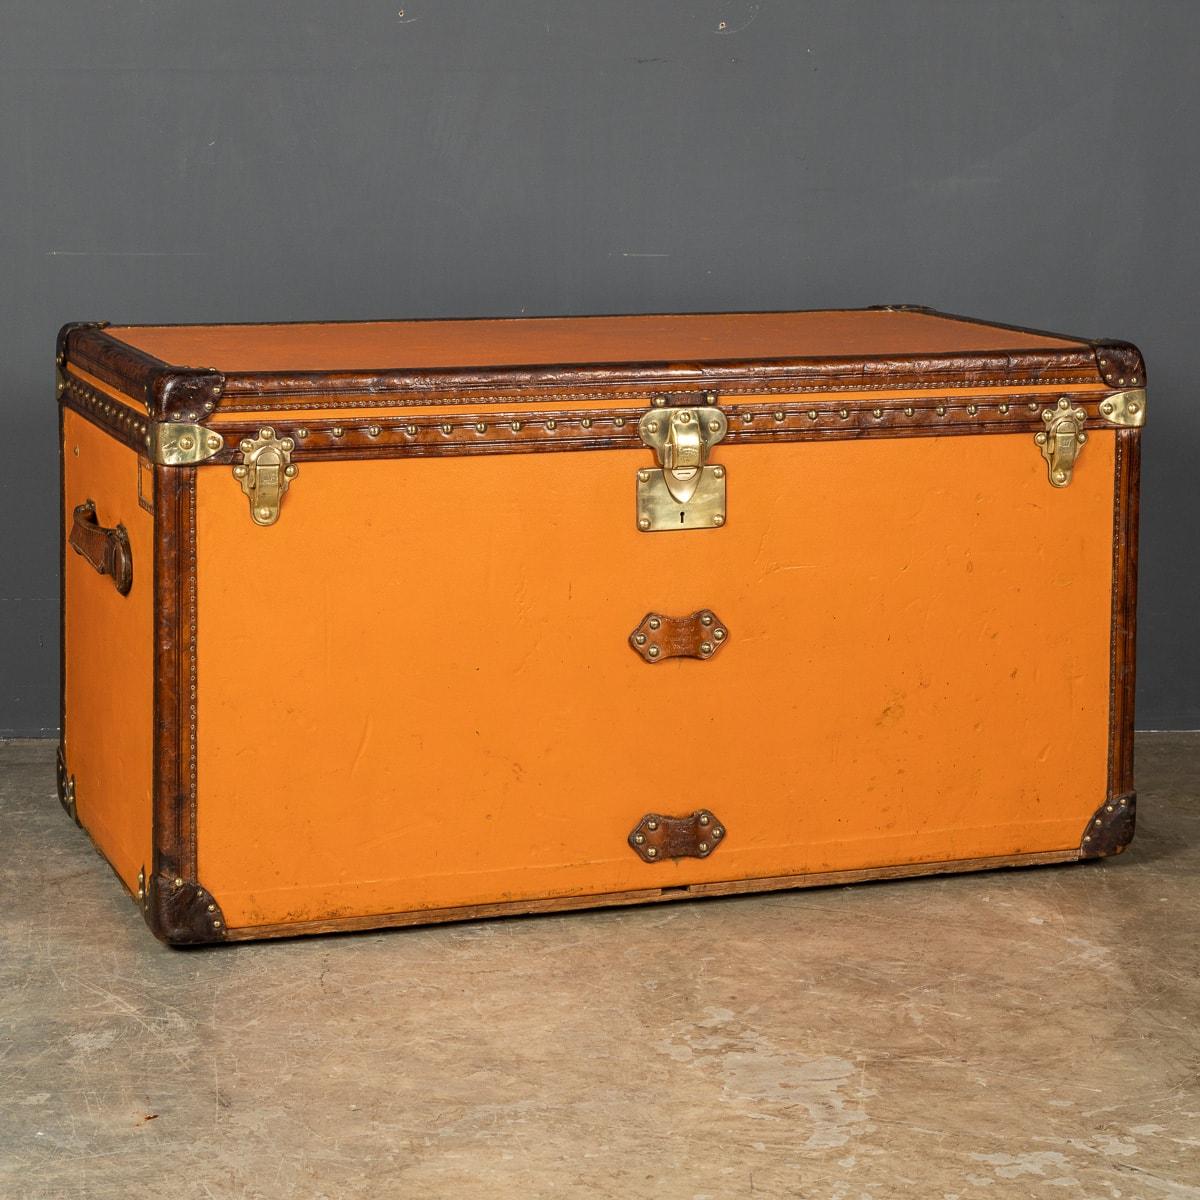 Antique early 20th century very rare Louis Vuitton “high trunk” trunk (from French “Malle Haute”), circa 1900's, features orange “Vuittonite“ canvas, all brass hardware, and leather trims. It is rare to find these trunks in as good condition as this